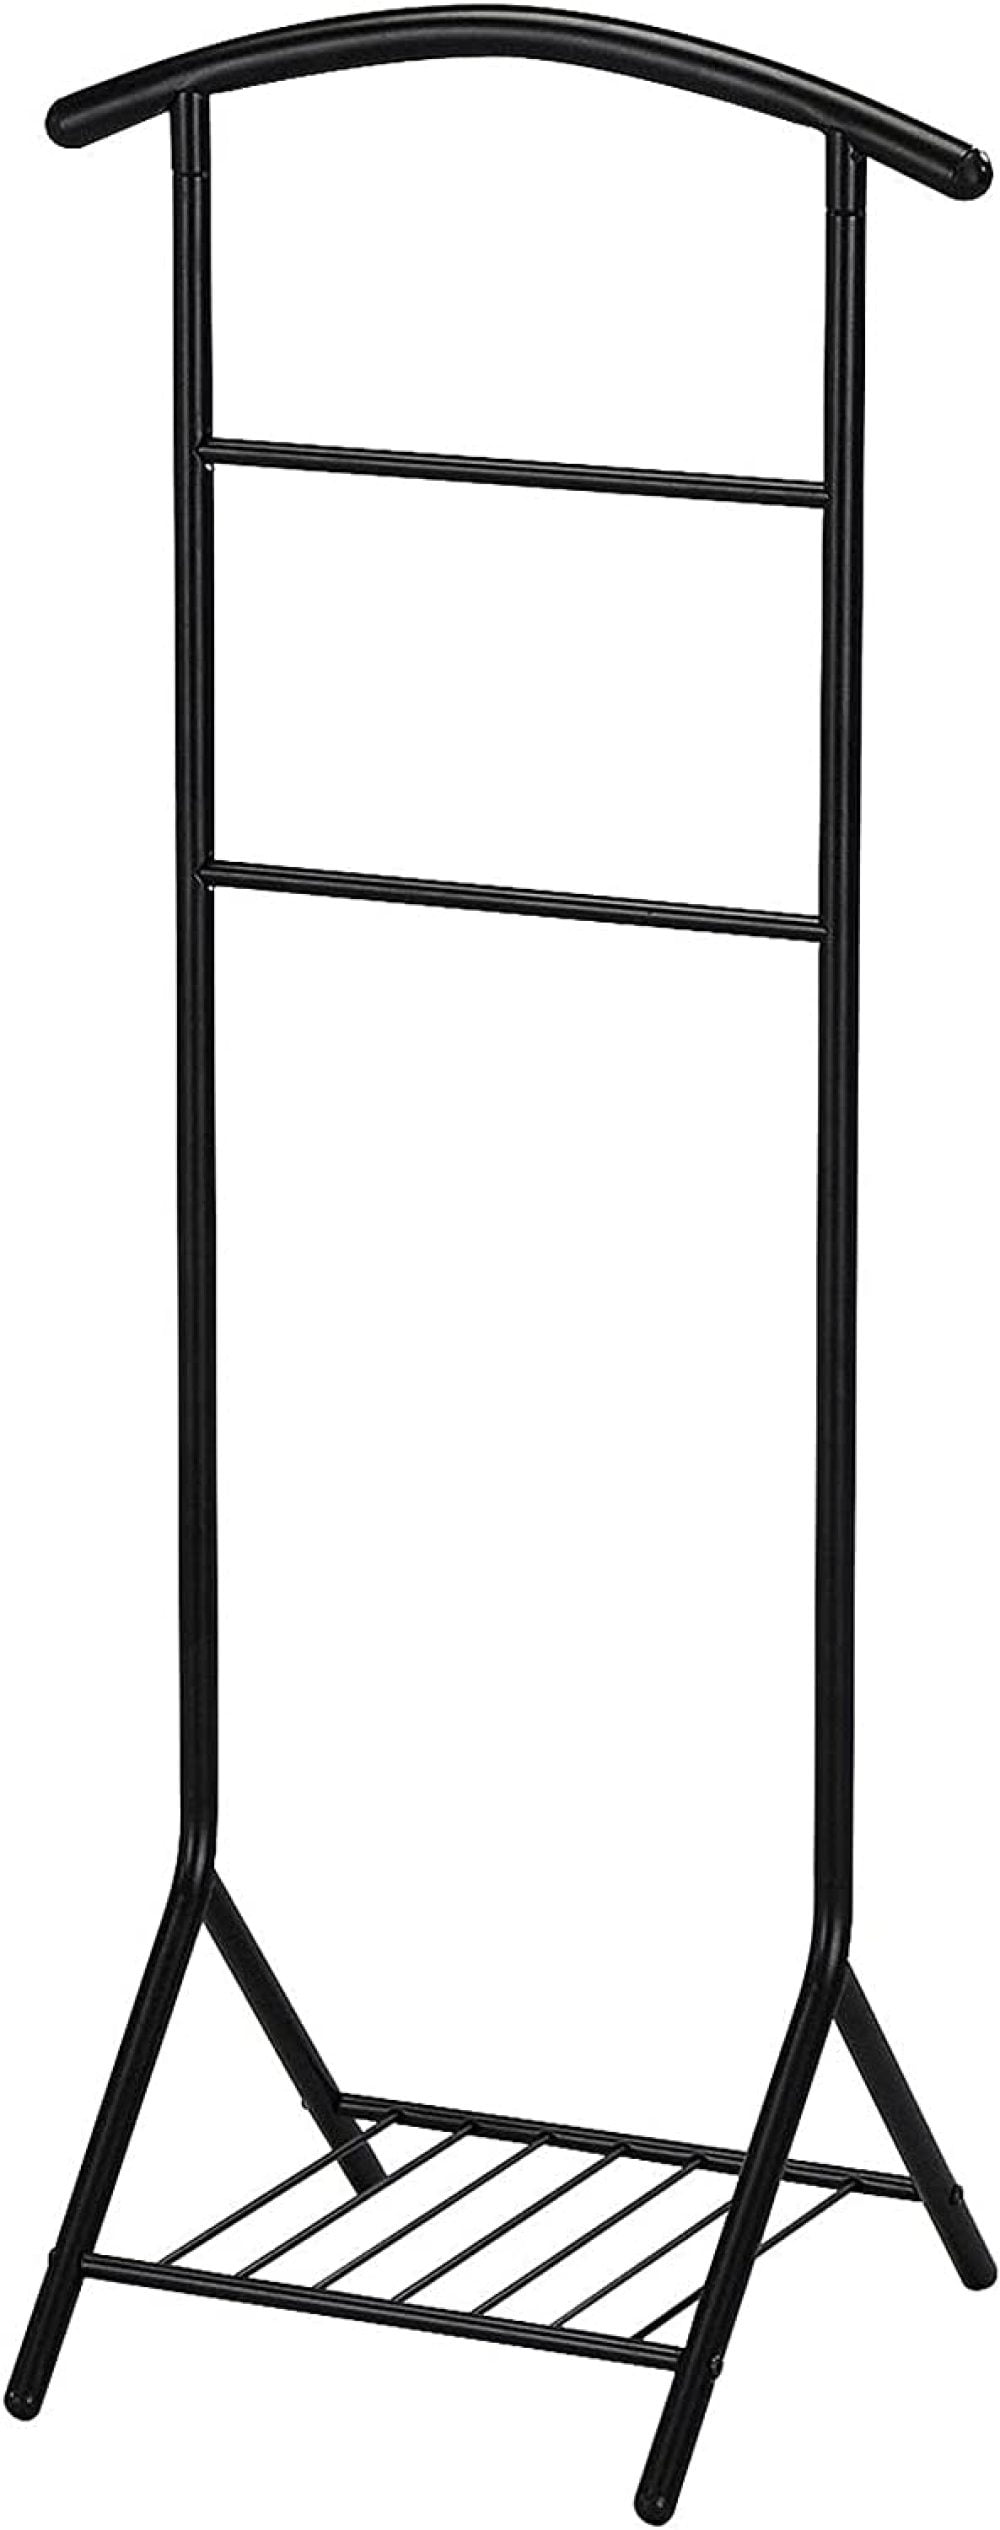 Black Kings Brand Millett Wood Suit Valet Stand Clothes Rack Chrome 